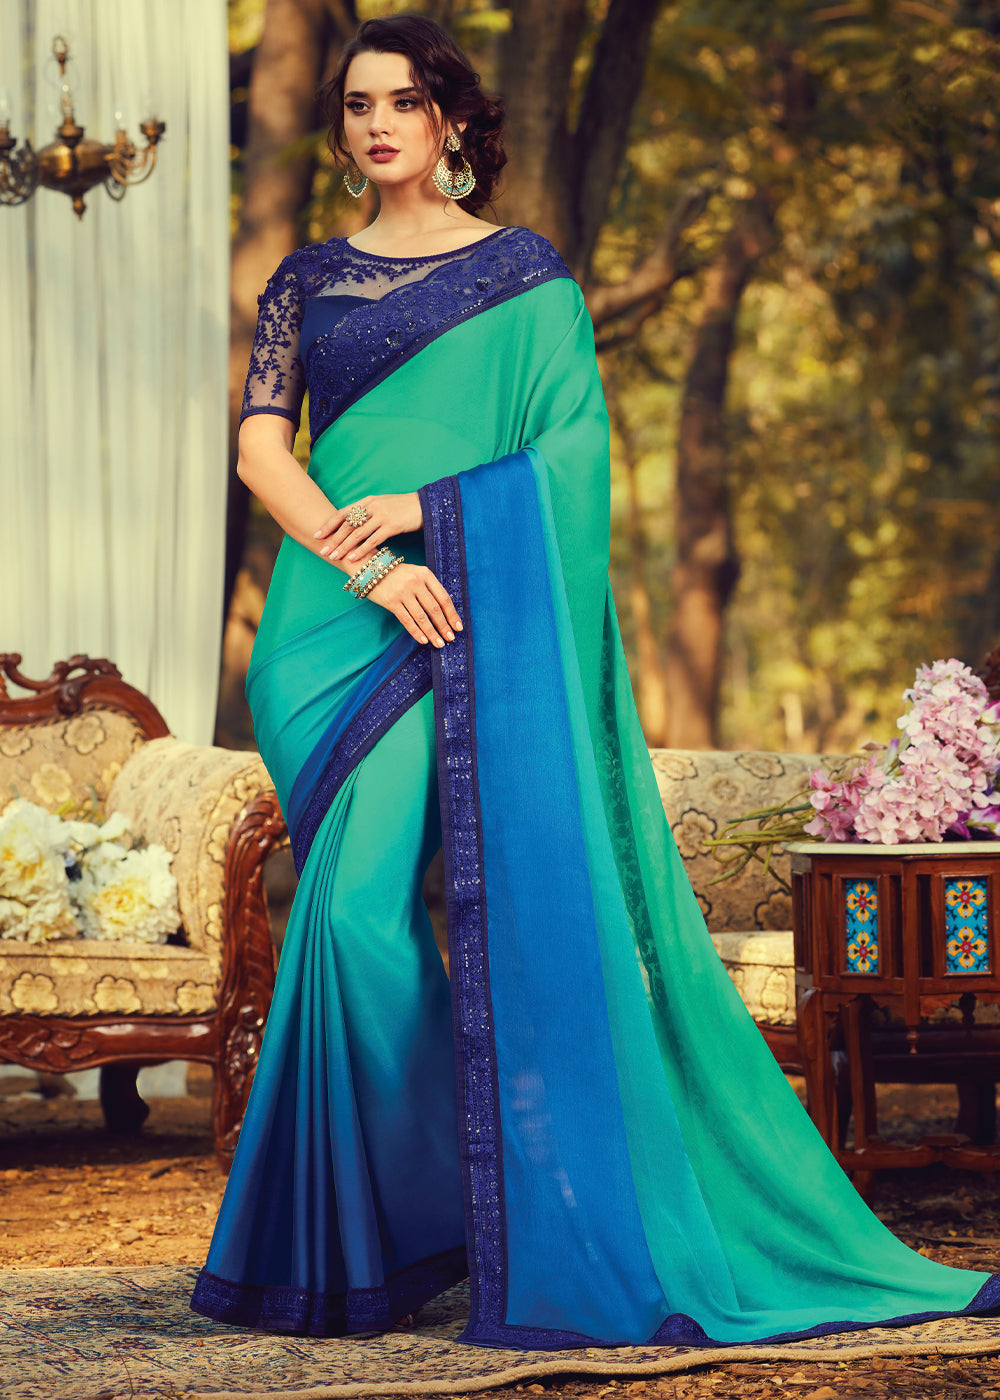 RE - Teal Green Coloured Sequence Work Designer Saree